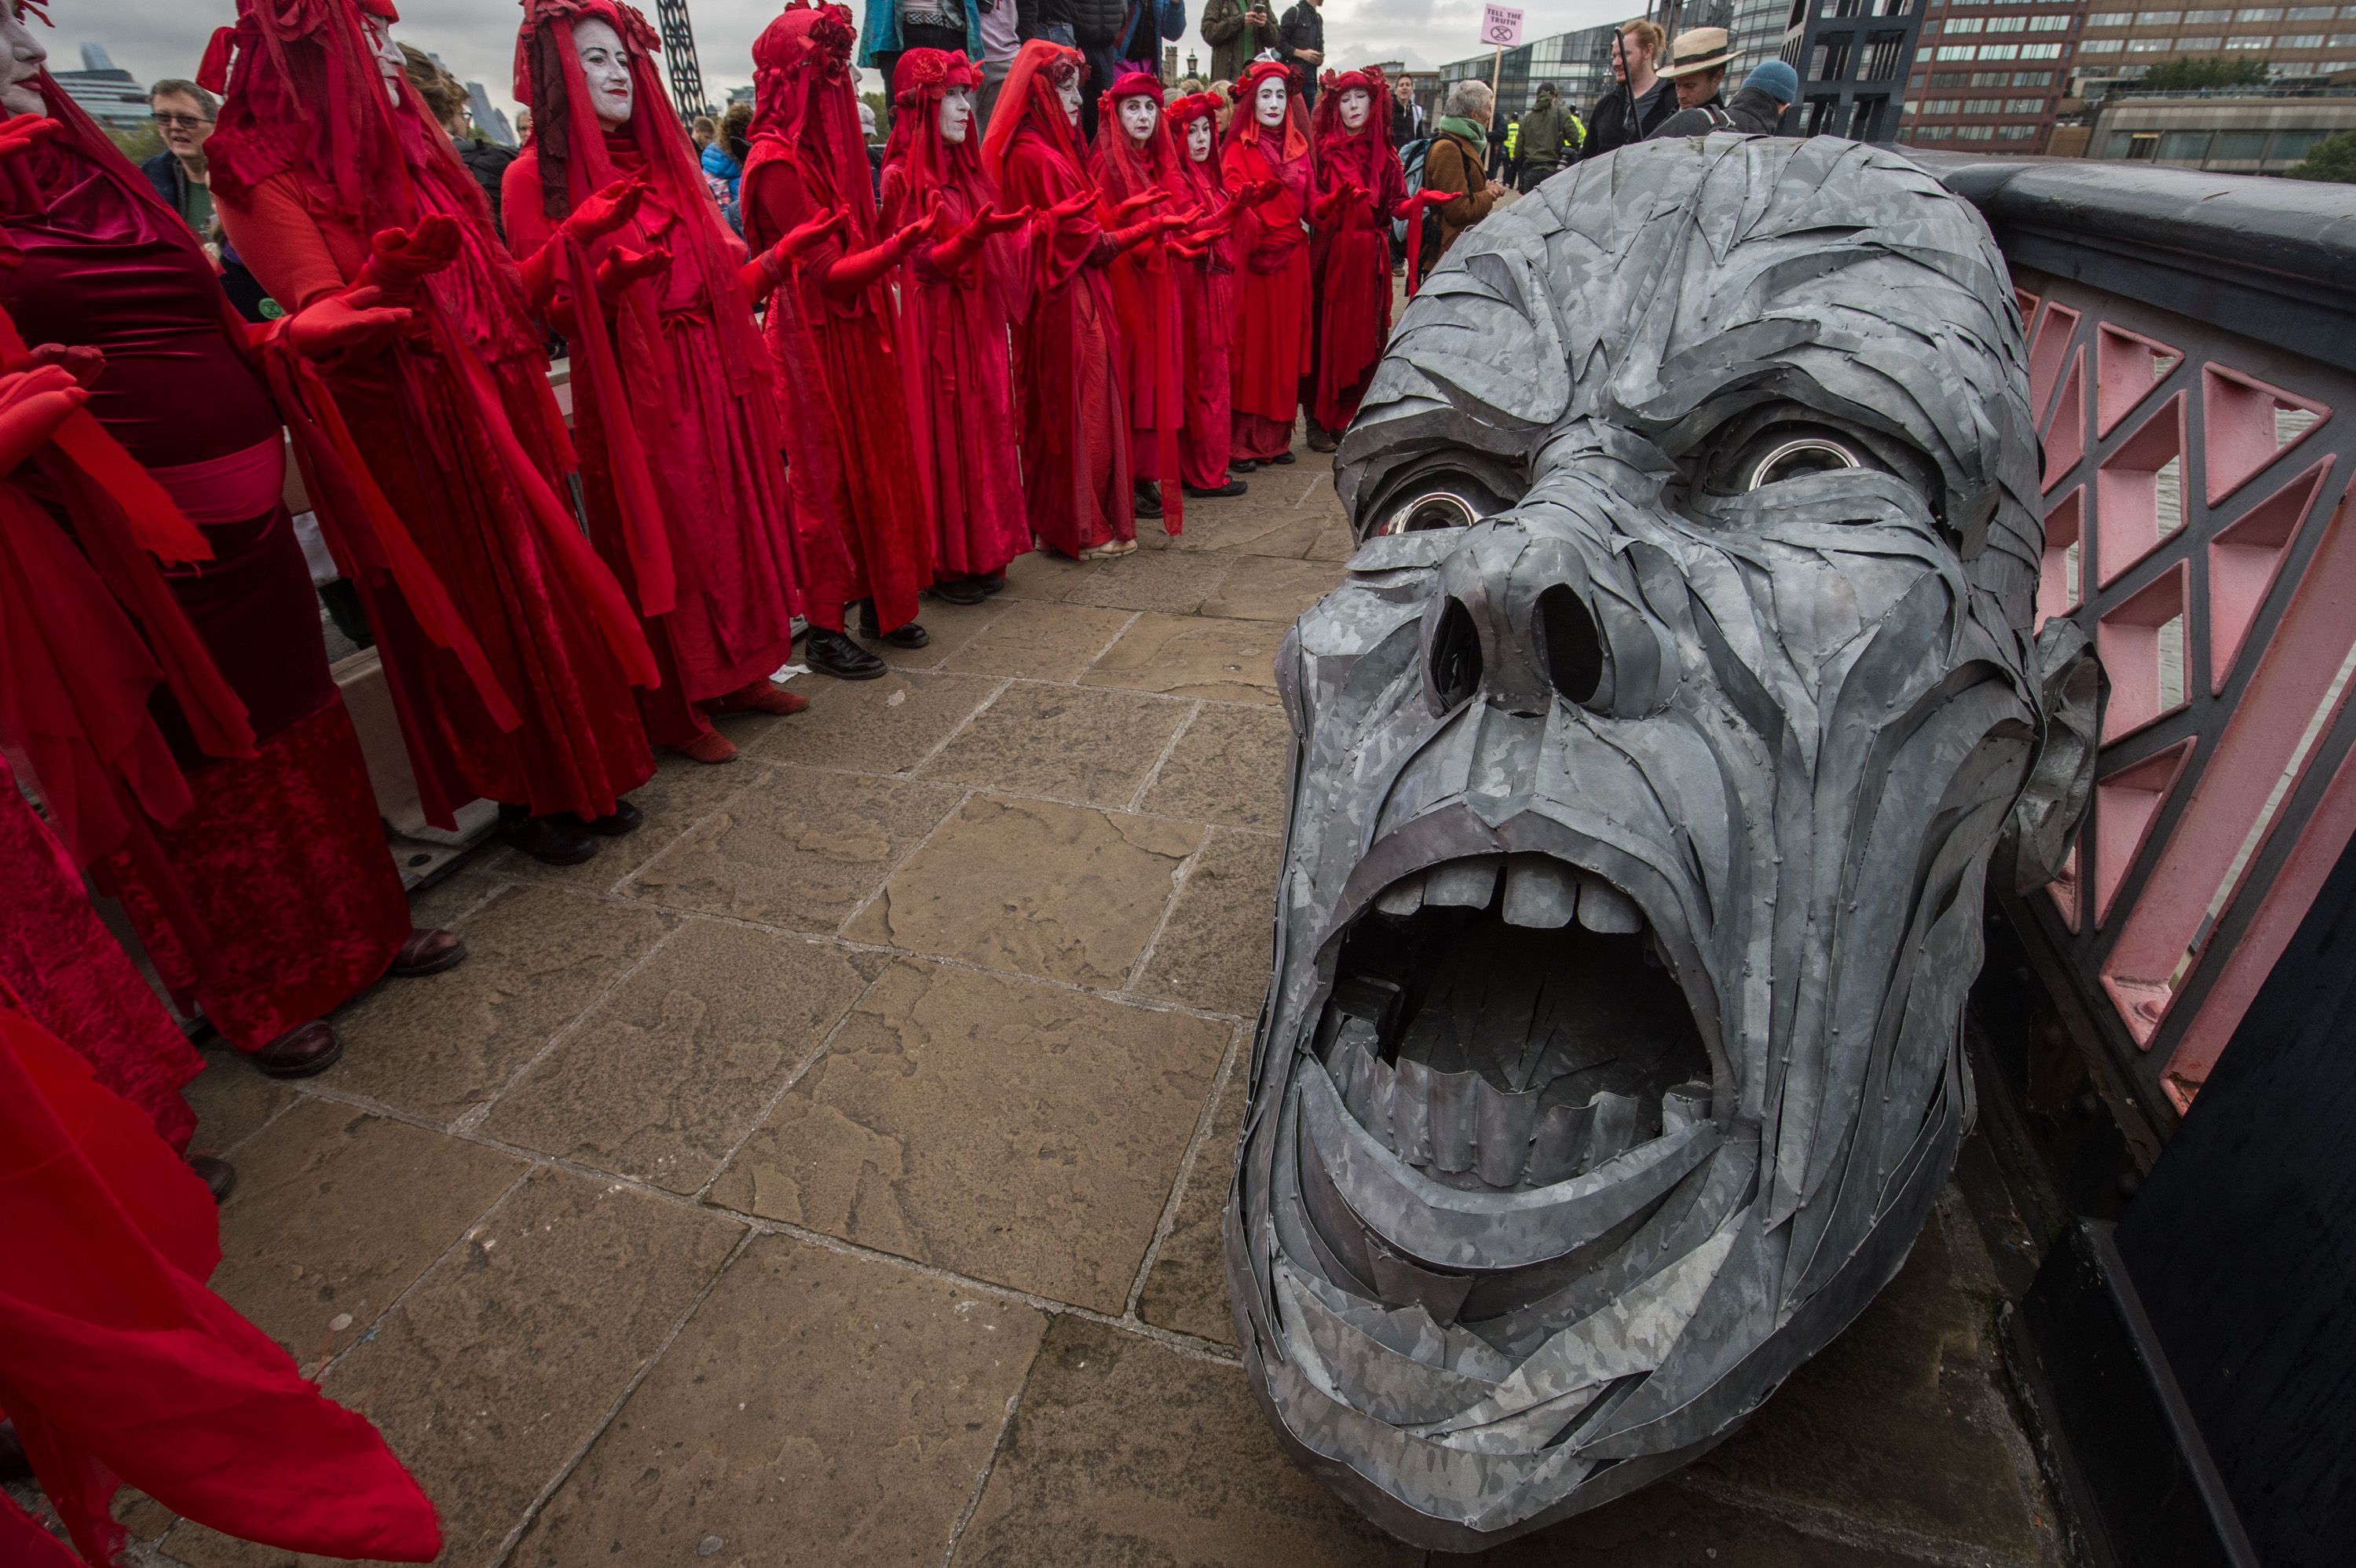 Theatre group by a sculpture on Lambeth Bridge on October 7, 2019 in London, England.